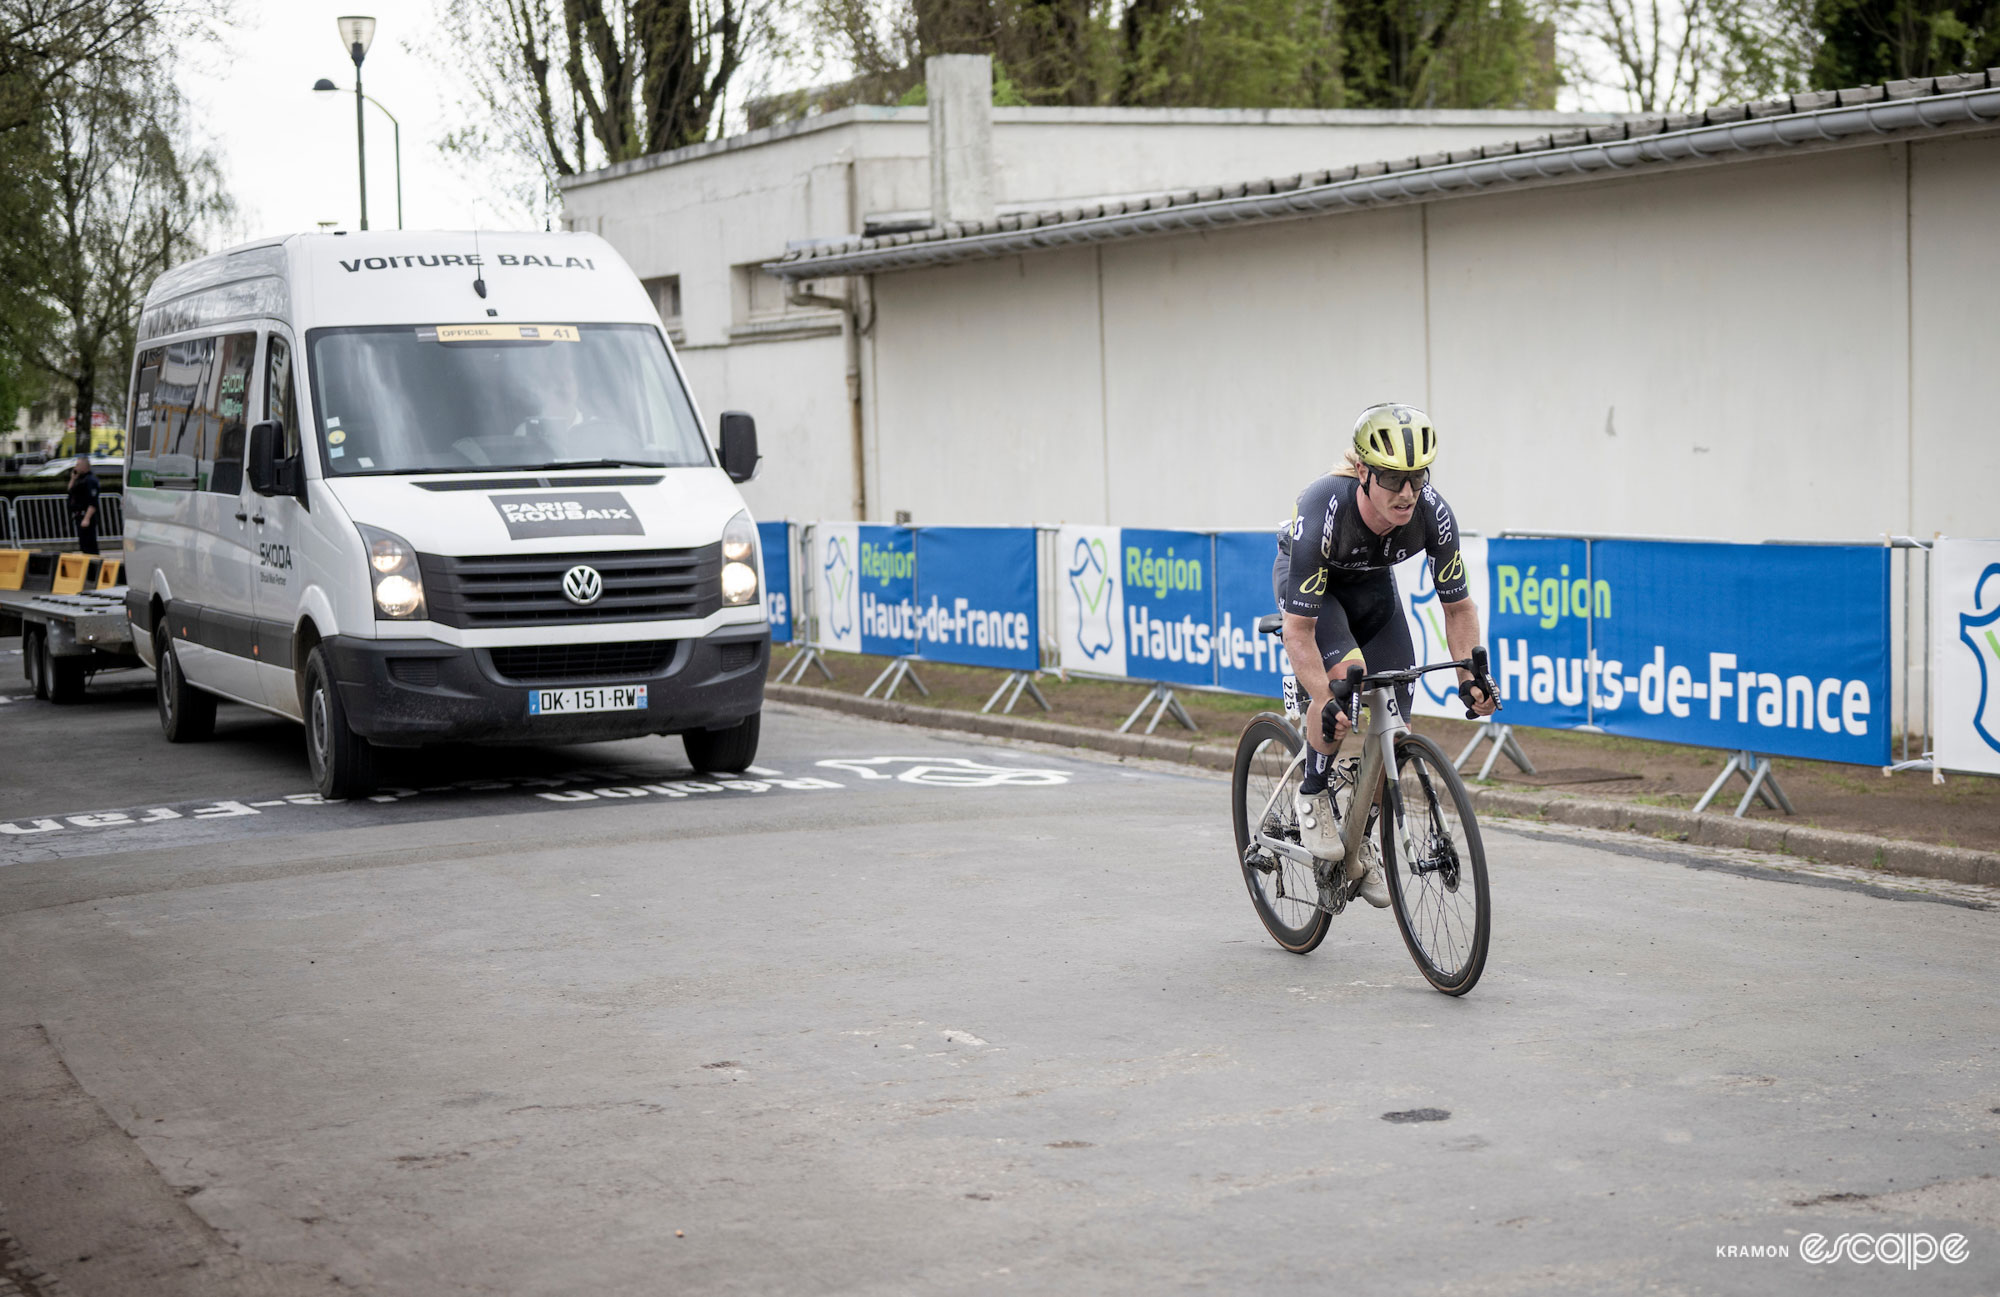 Cyrus Monk enters the Roubaix velodrome ahead of the broom wagon. The barriers are empty of fans now.